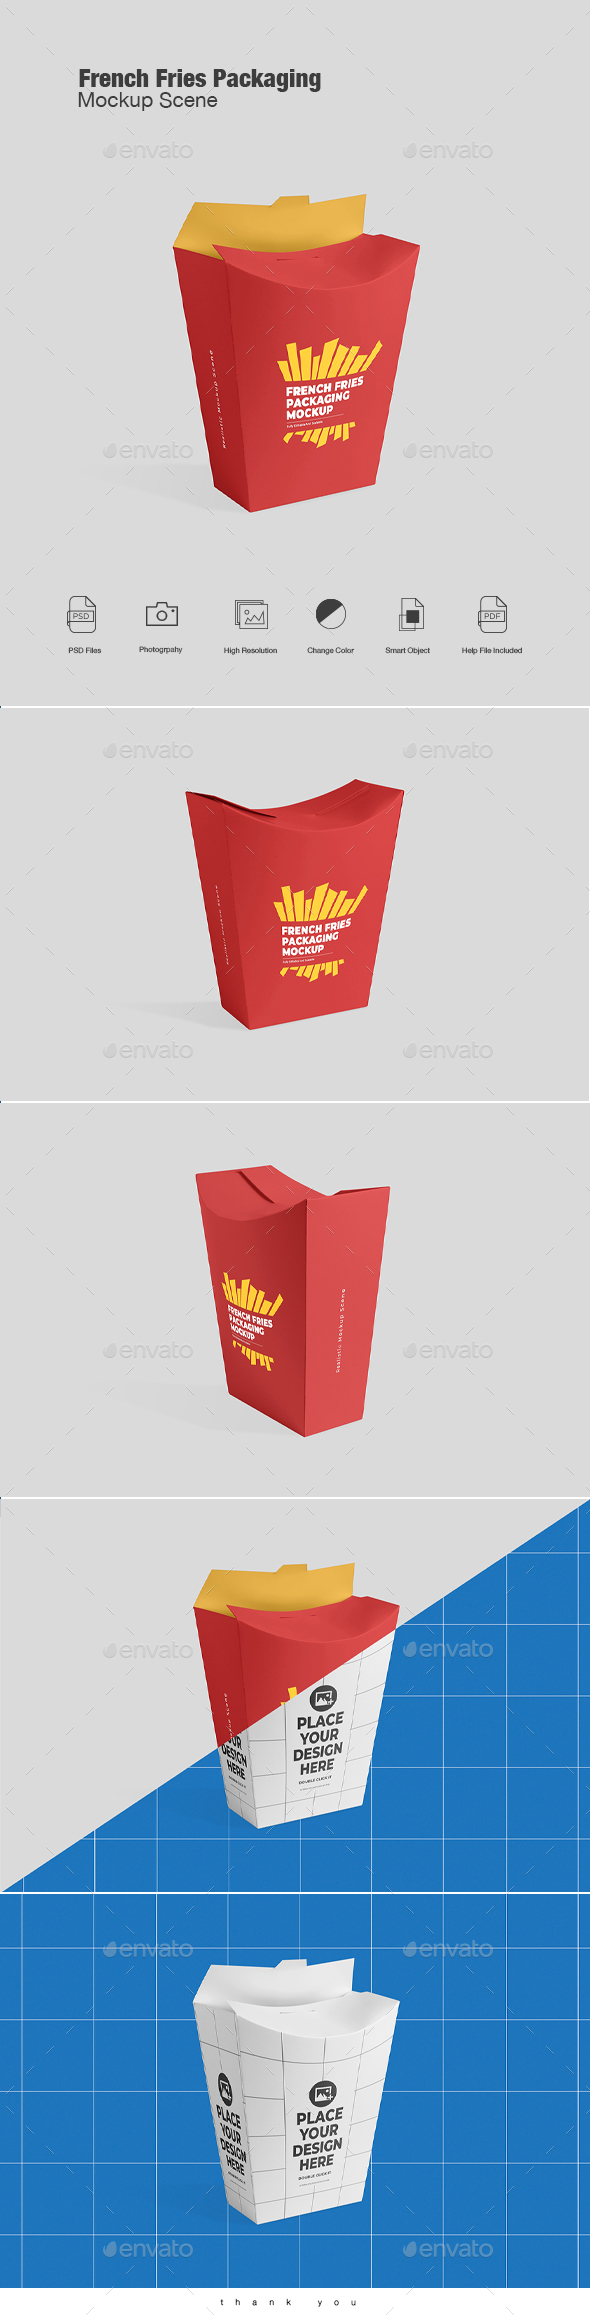 [DOWNLOAD]French Fries Packaging Mockup